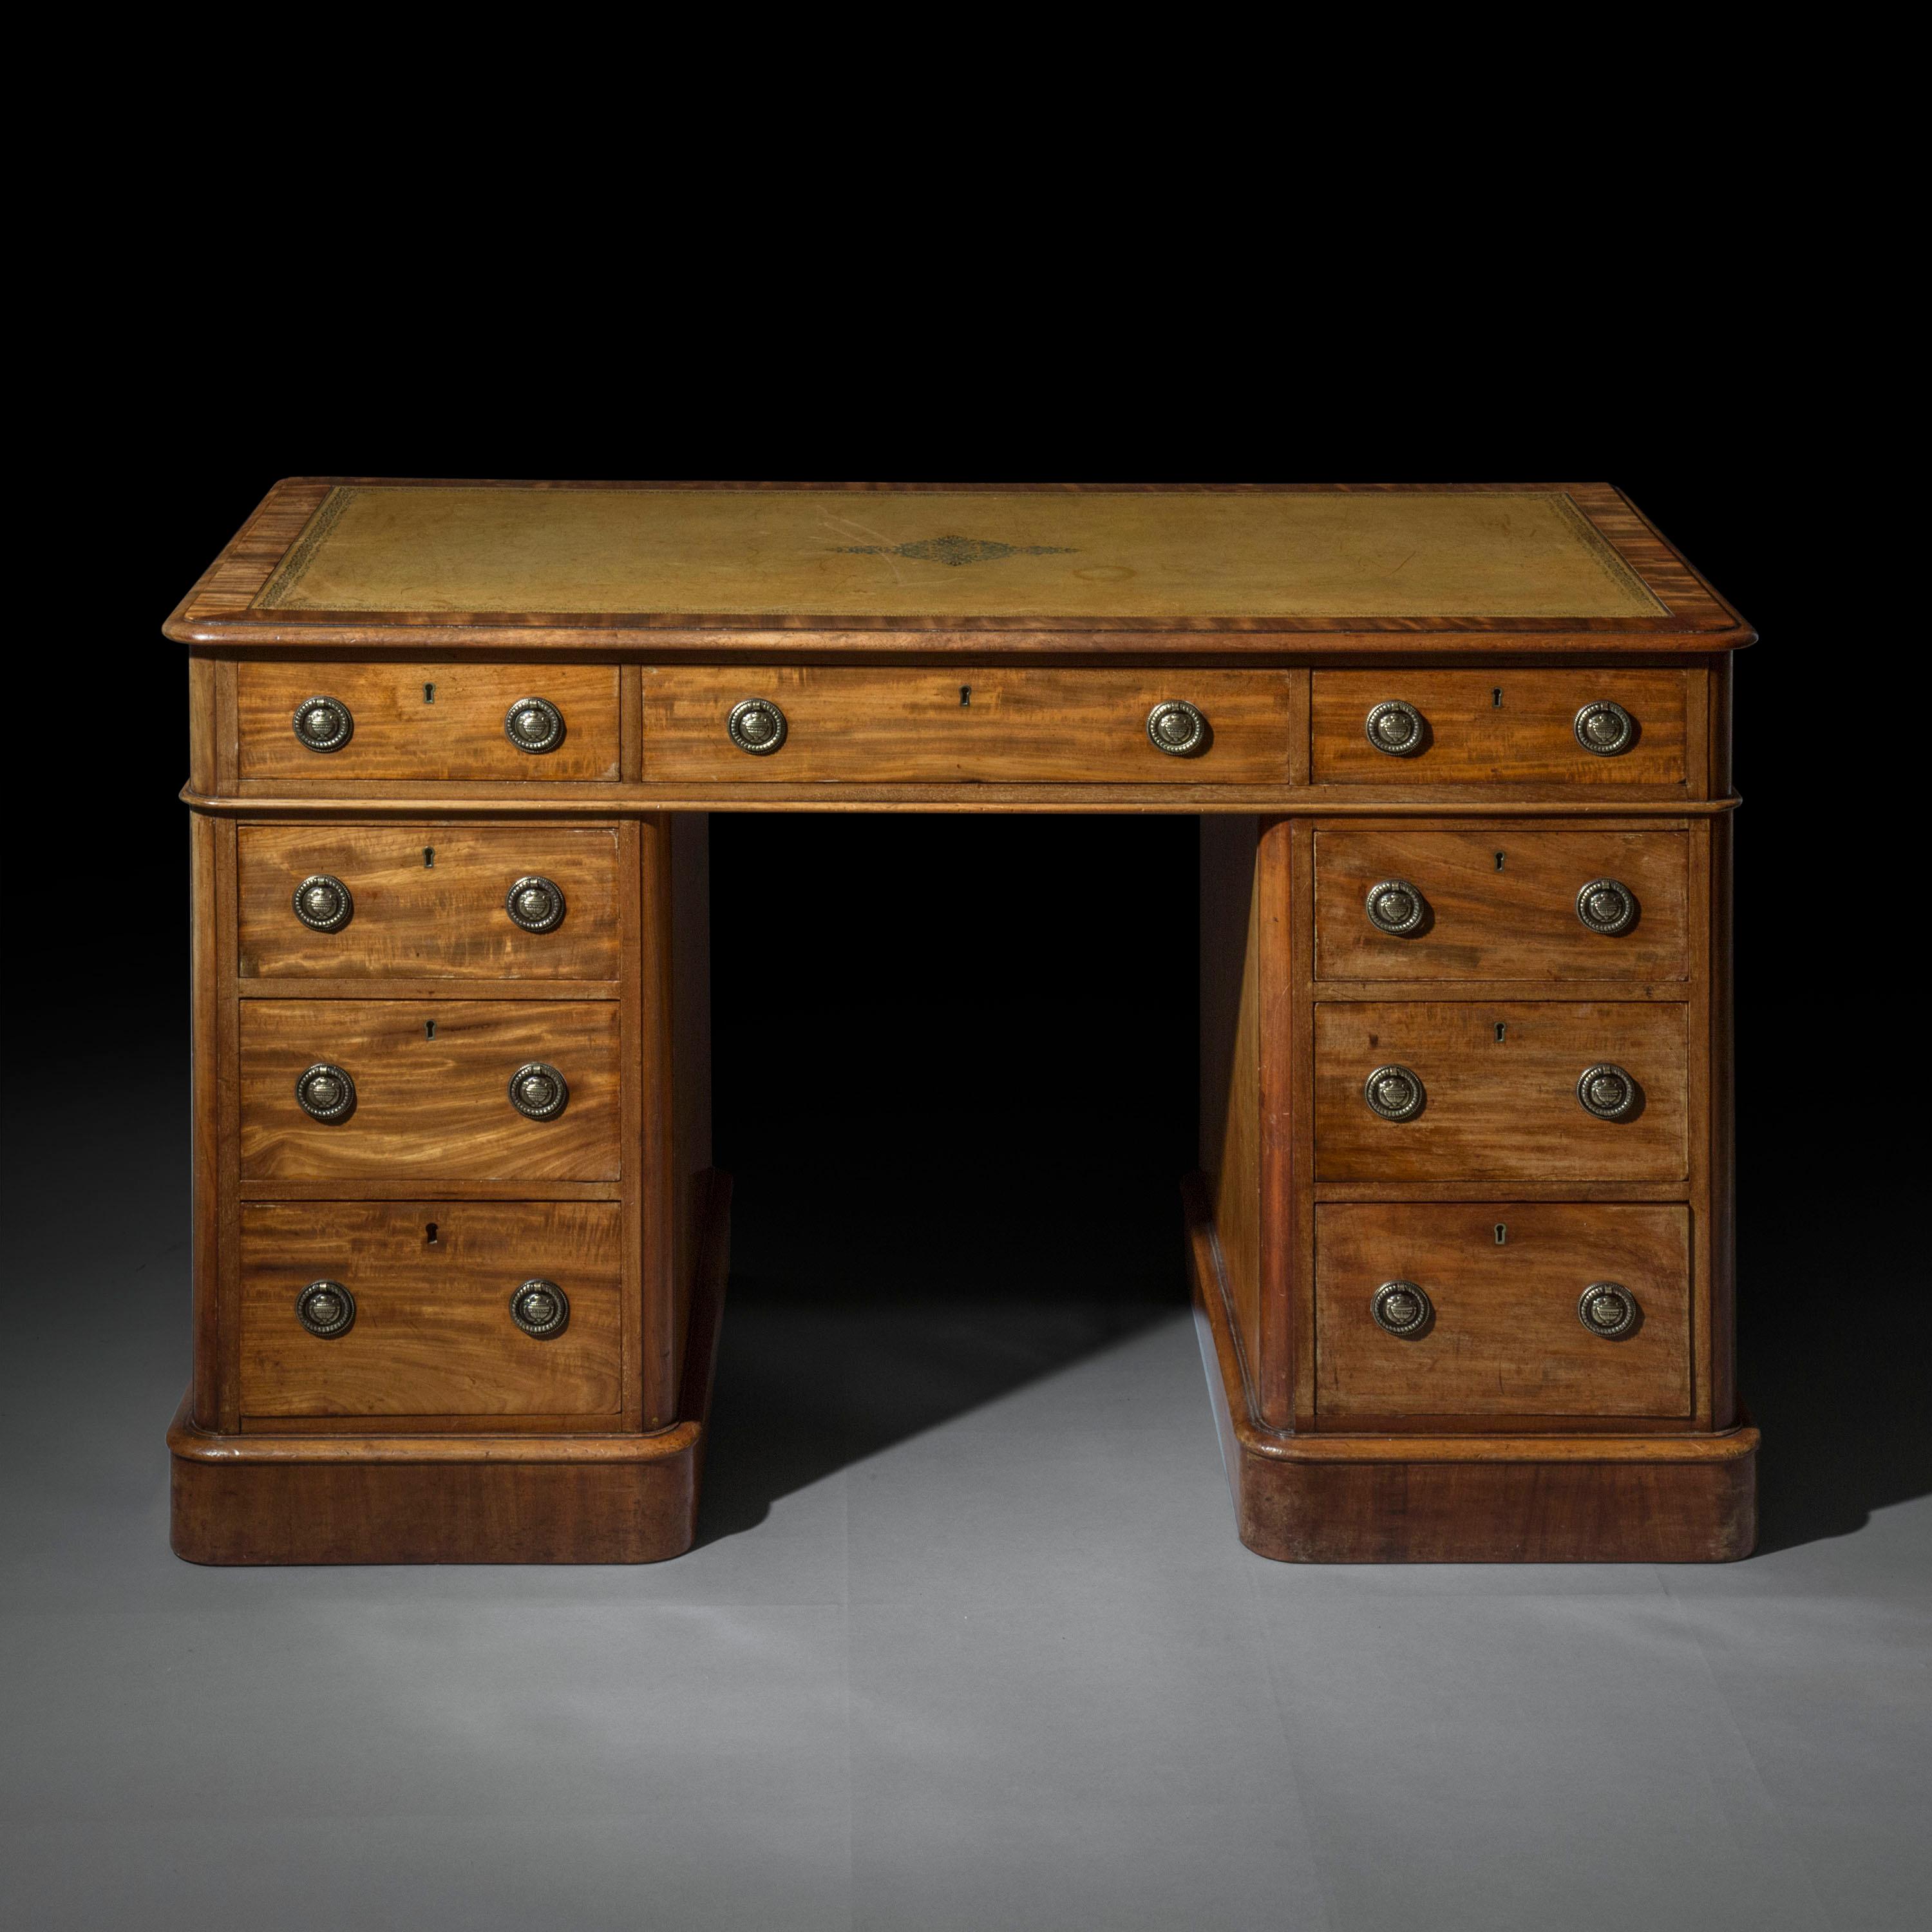 A fine quality George IV, William IV period library table or desk in beautifully faded mahogany.
English, circa 1830

Why we like it
The finest quality figured mahogany has mellowed to a most wonderful honey color. The drawers are mahogany-lined